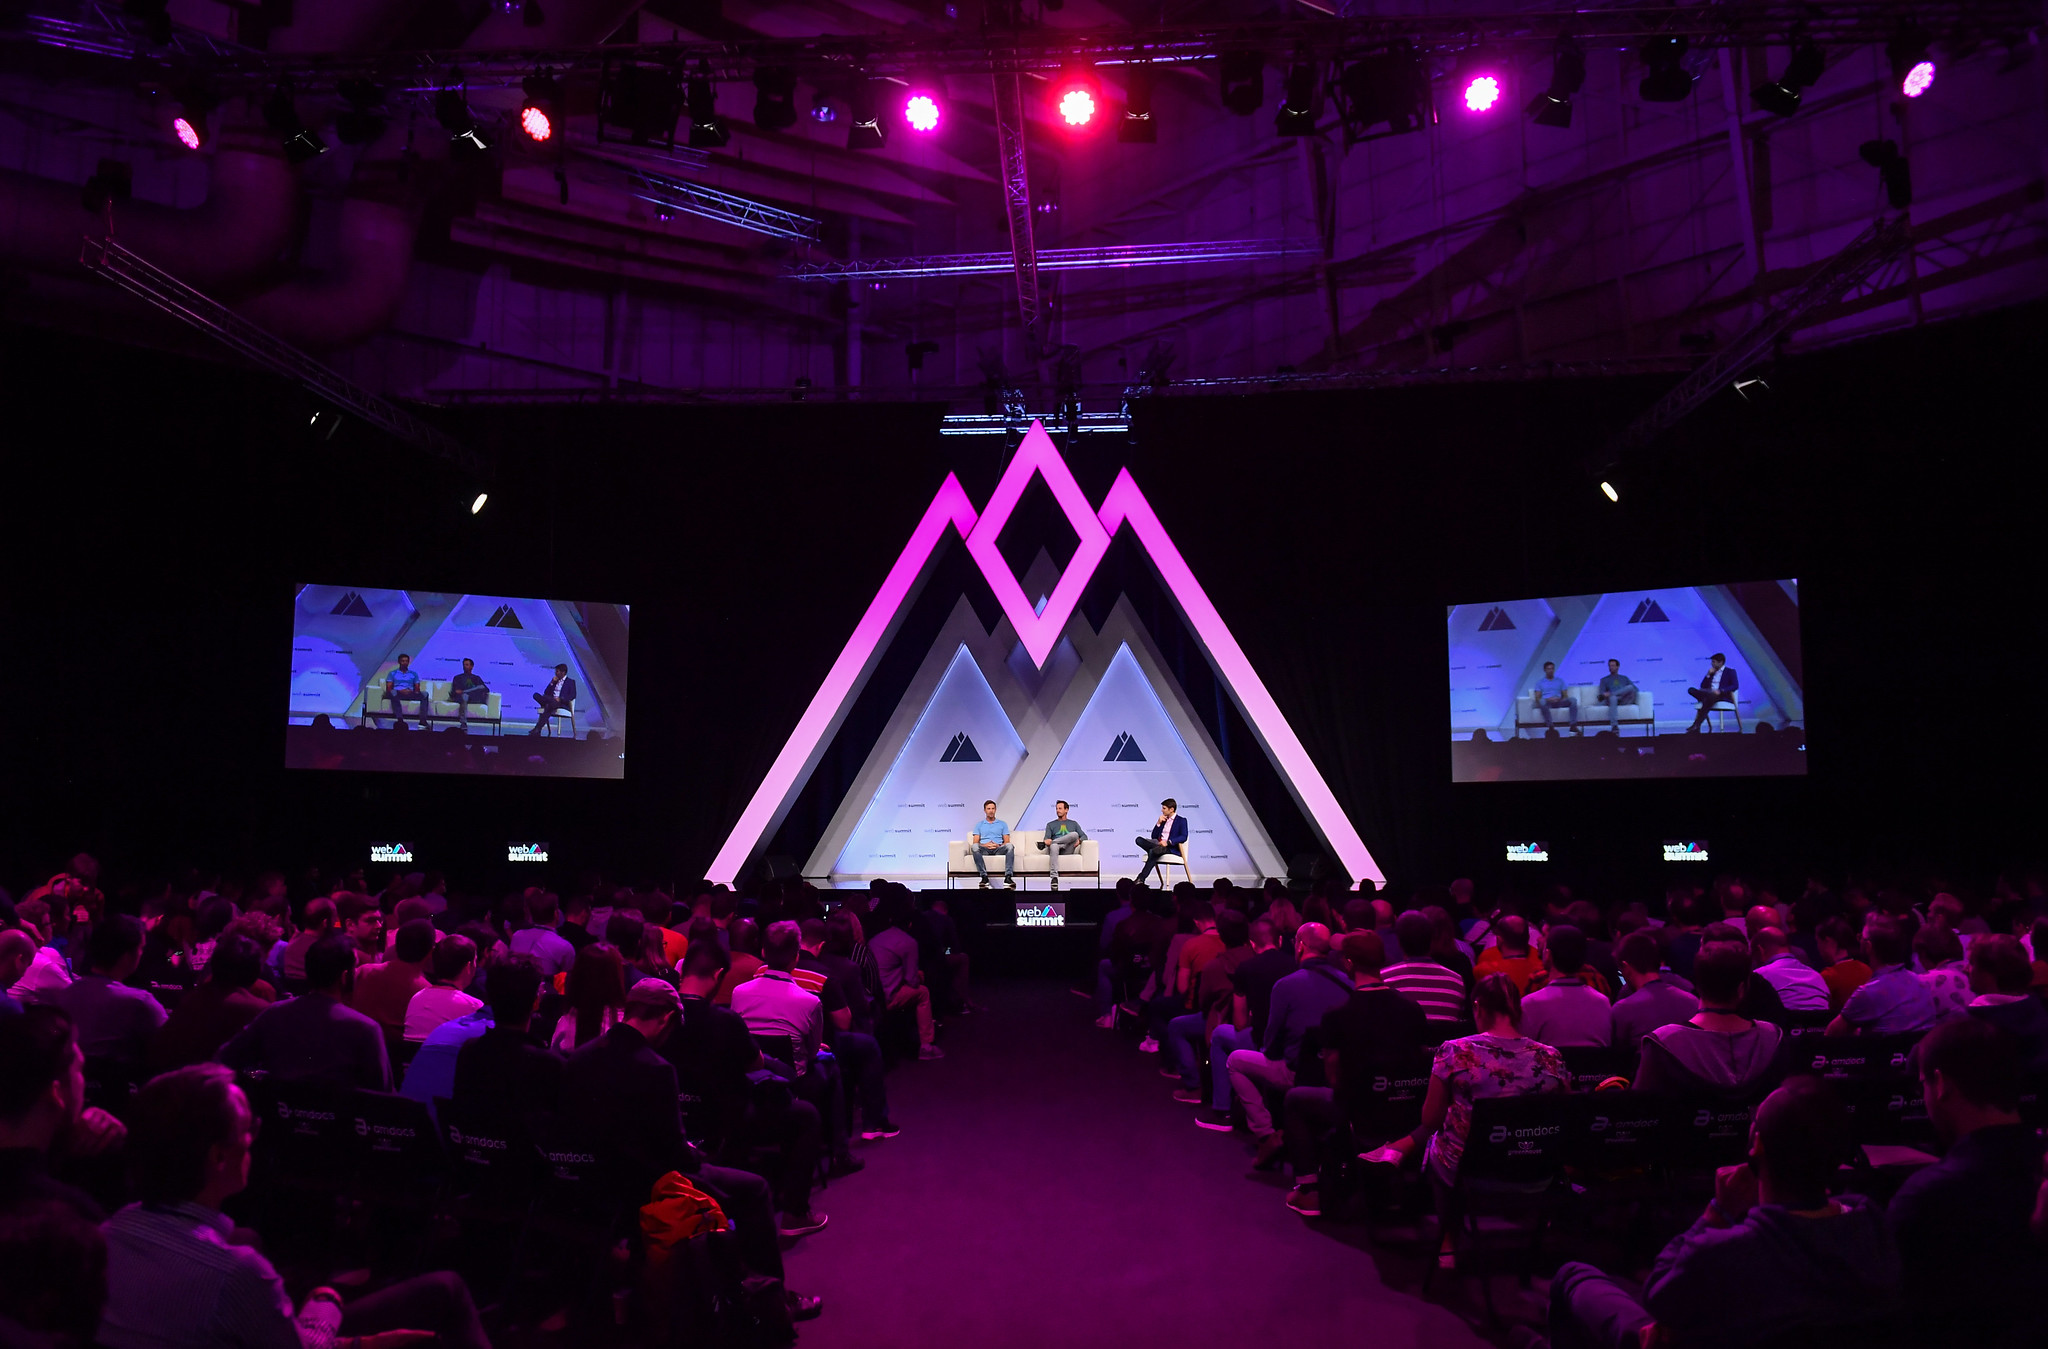 Photo of a lit up stage at Web Summit. The stage has mountain-shaped lights. There appear to be three speakers sitting on the stage engaged in conversation. There is a full audience watching the stage. There are two screens on either side of the stage.